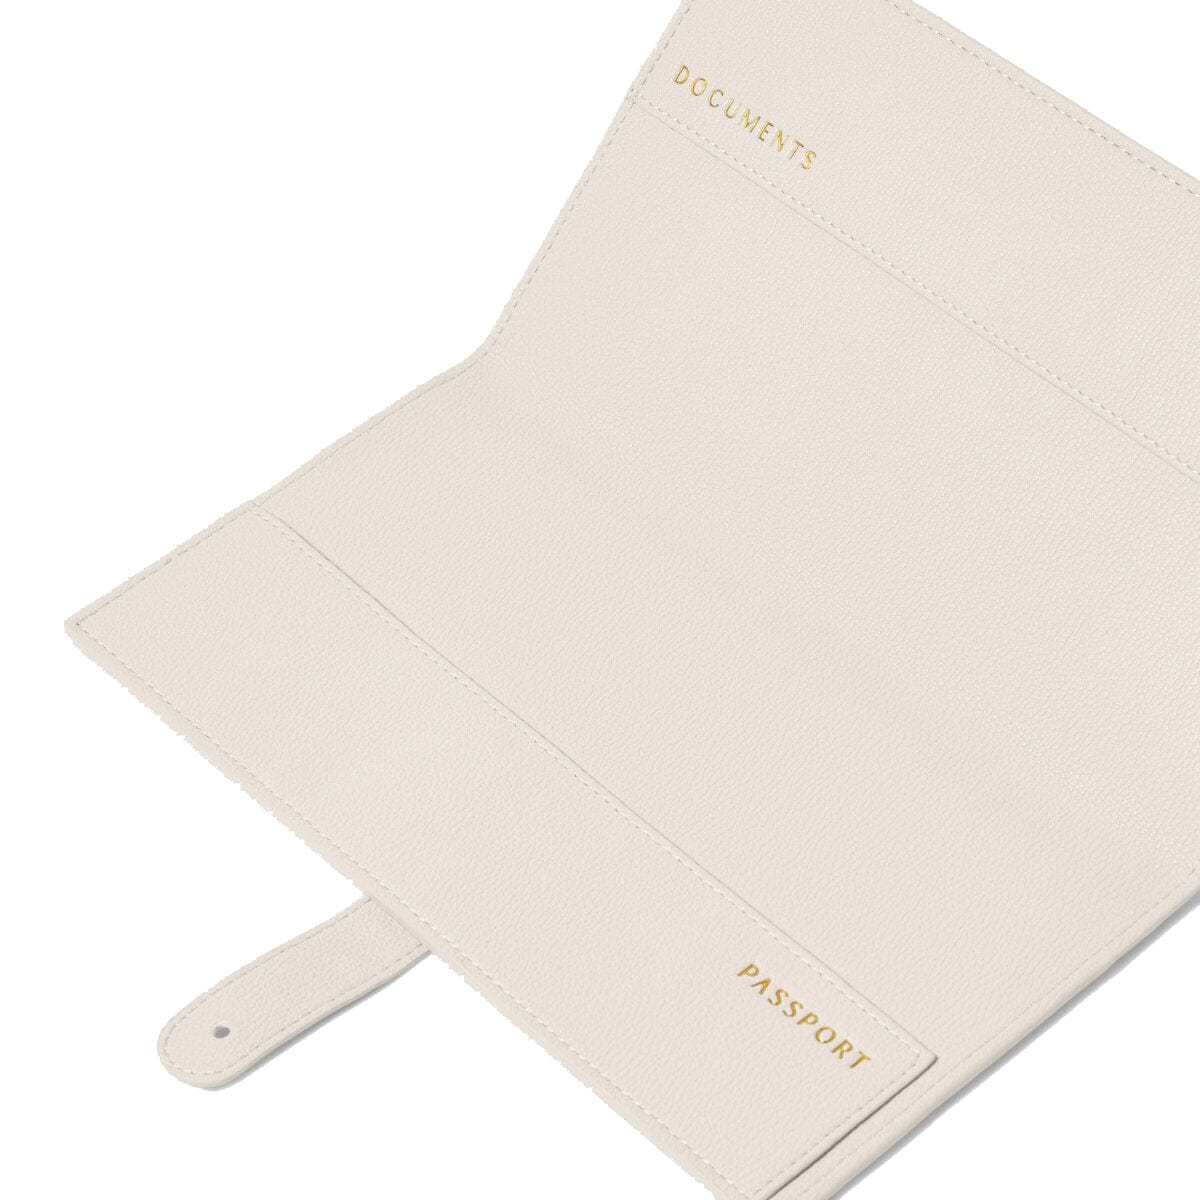 Katie Loxton Travel Accessories Katie Loxton Sentiment Travel Wallet - Off-White/Light Taupe/Black